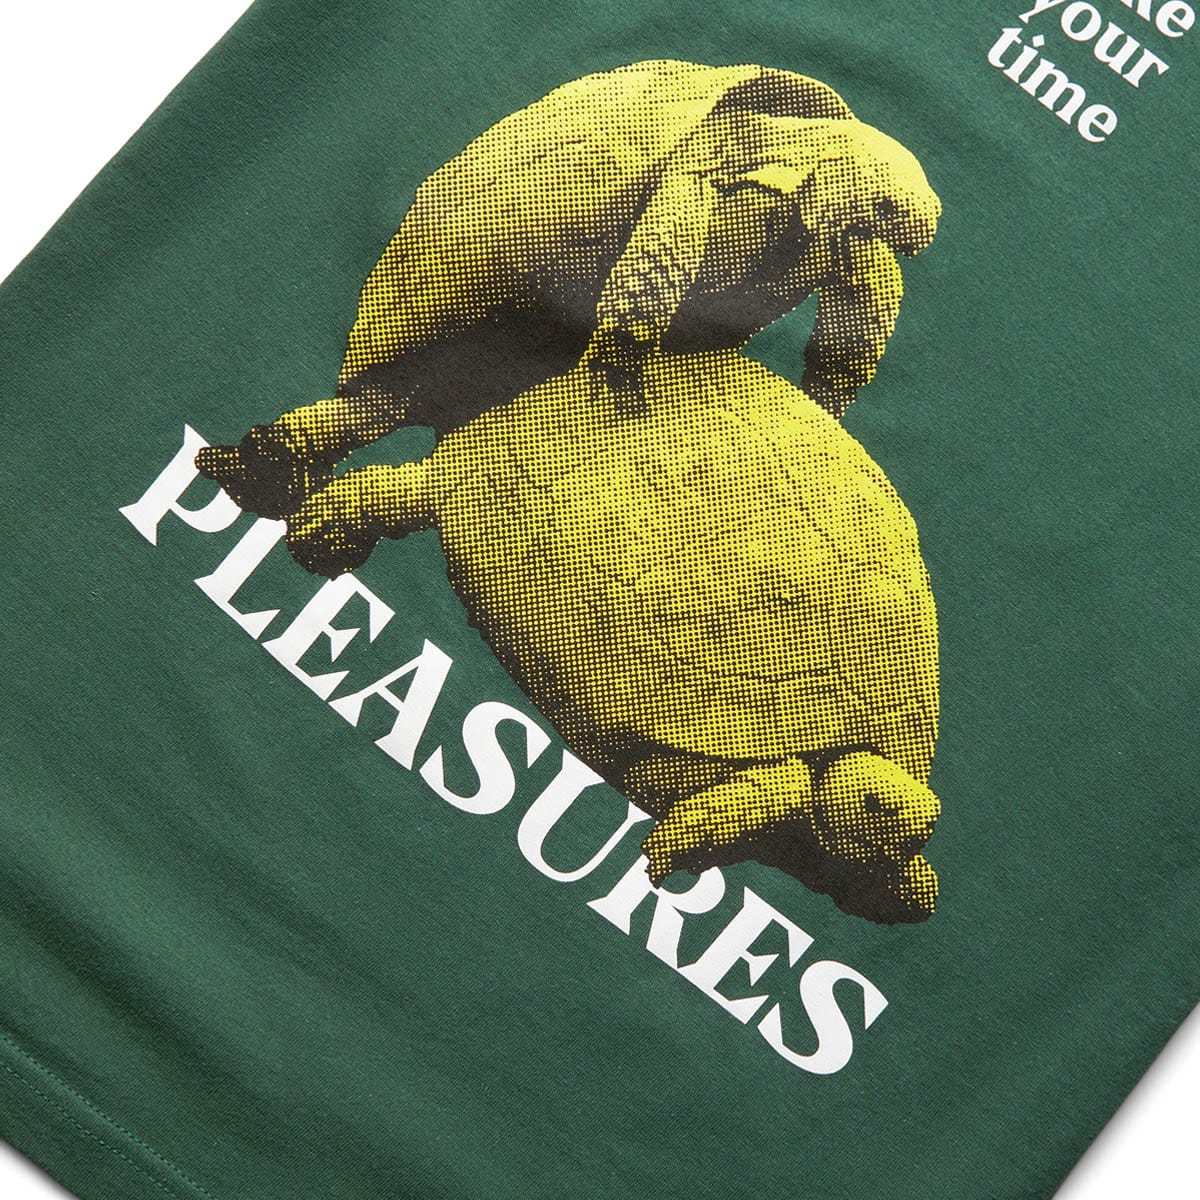 Pleasures T-Shirts YOUR TIME T-SHIRT